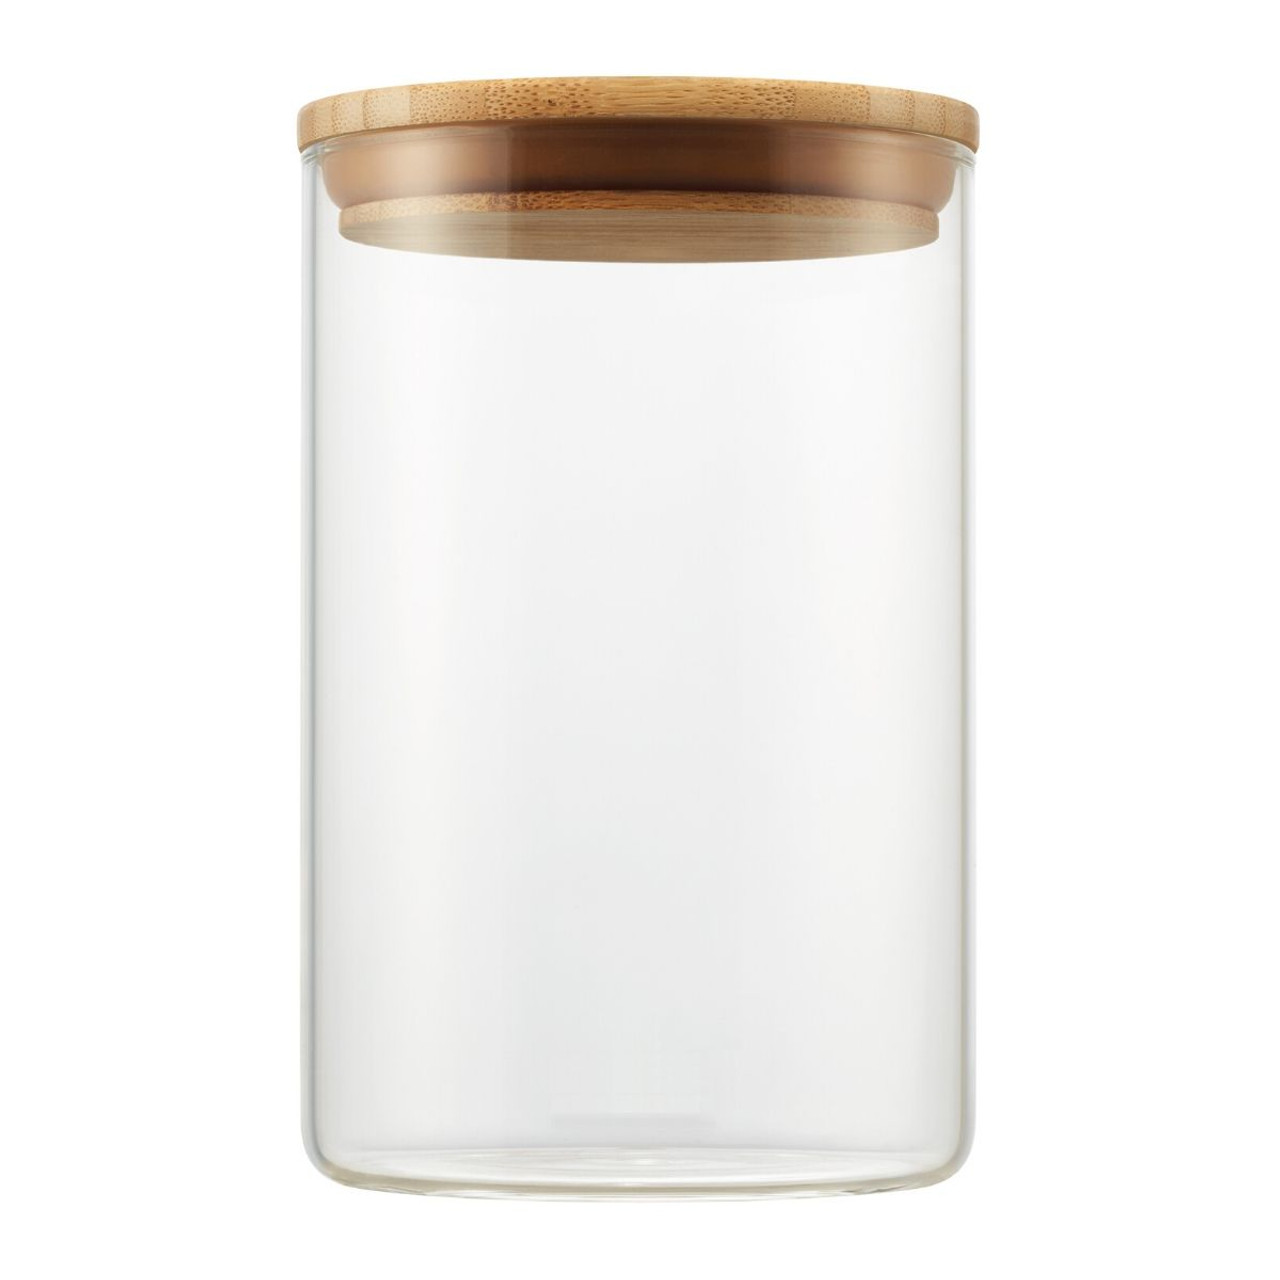 Large Glass Storage Canister with Blonde Wood Top - Hudson Grace